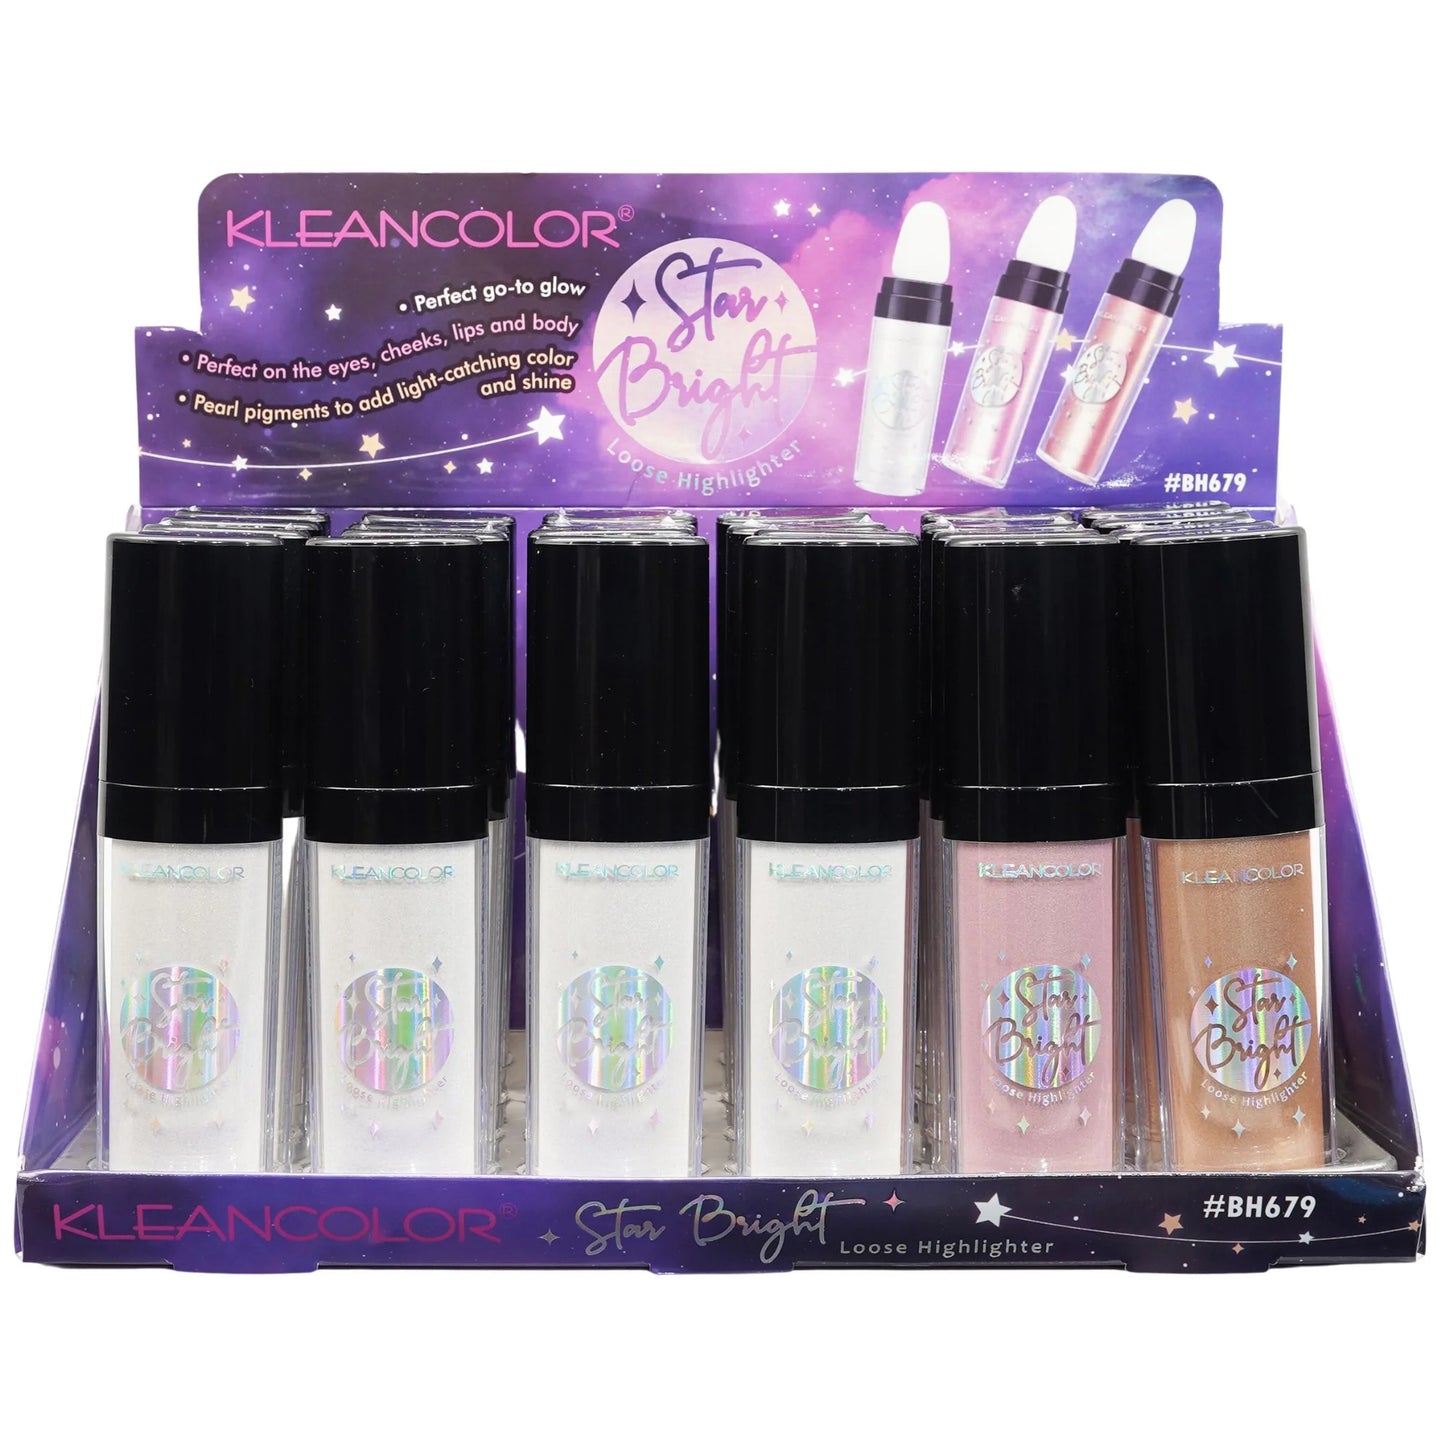 BH679 Kleancolor Star Bright Loose Highlighter Display